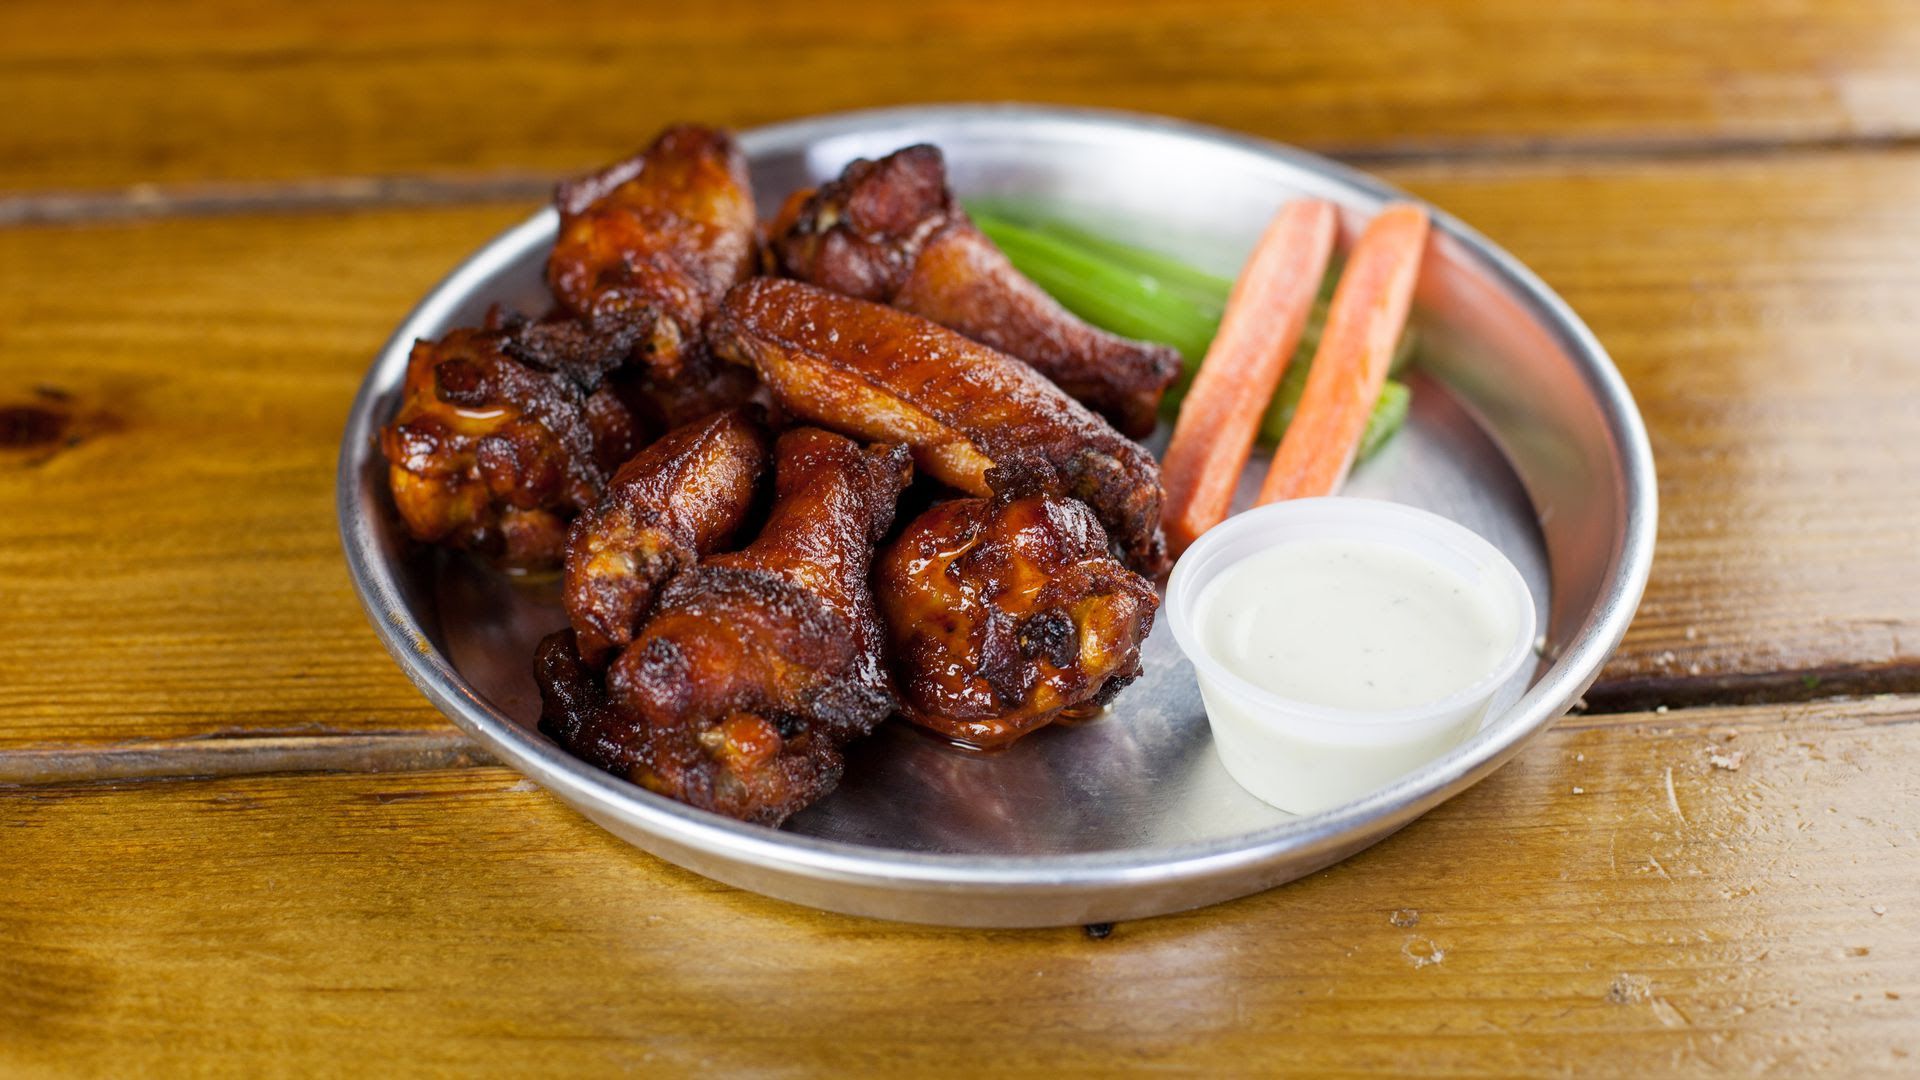 A fresh plate of chicken wings from Edley's